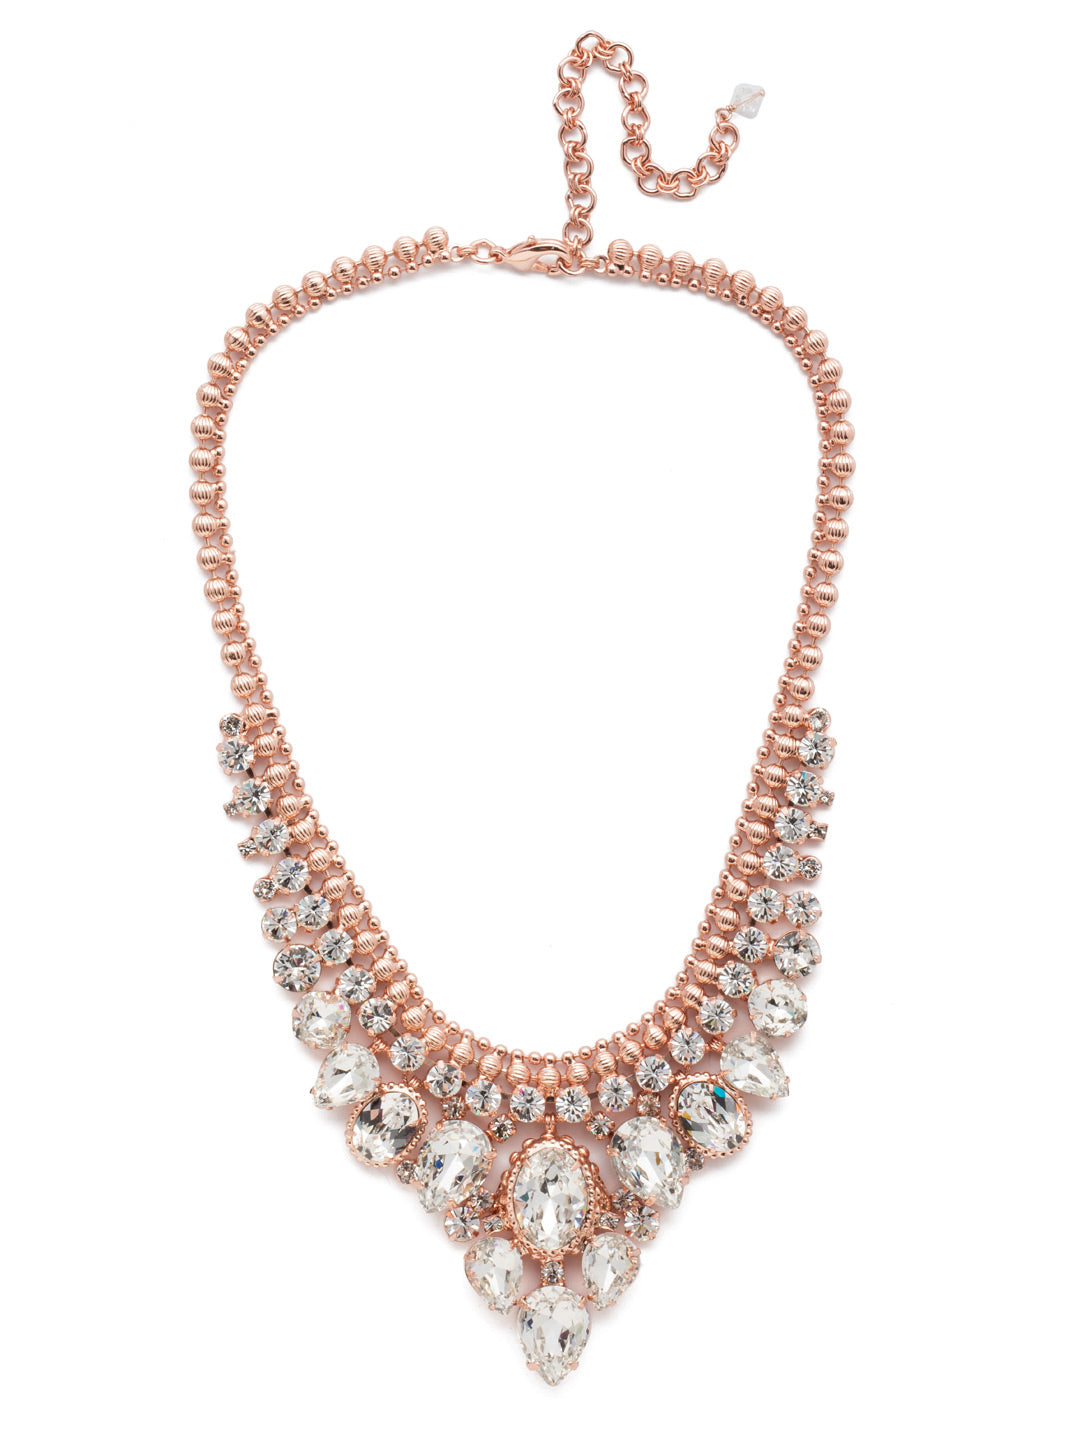 Protea Statement Statement Necklace - NDQ3RGCRY